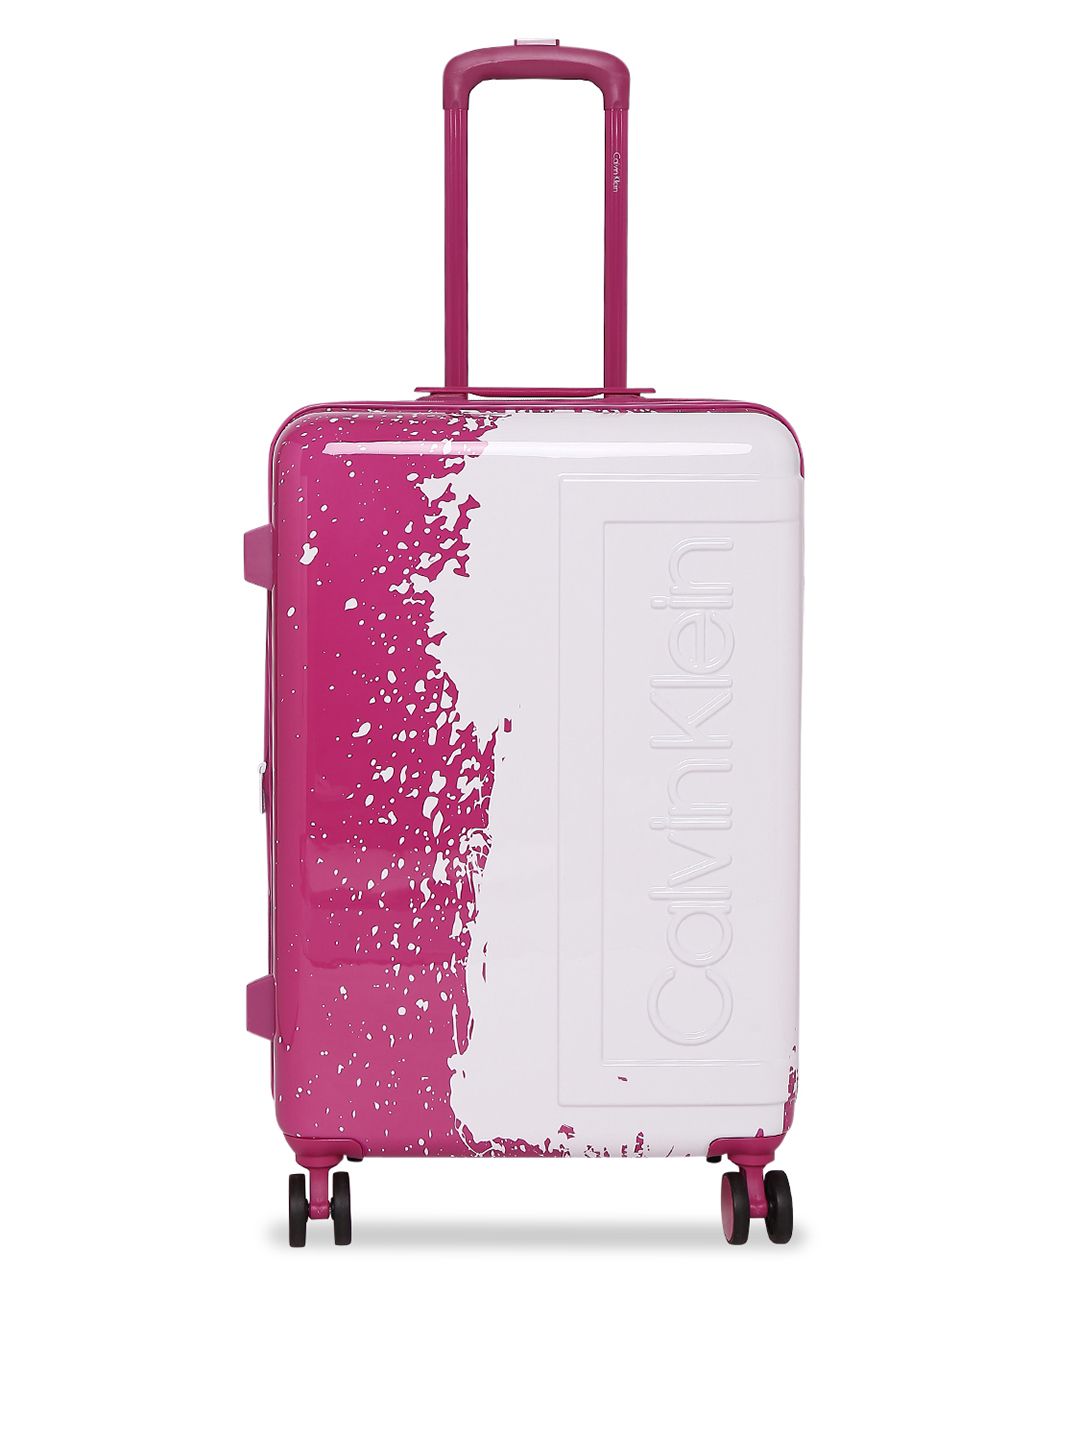 Calvin Klein Pink Textured The Factory Hard-Sided Medium Trolley Suitcase Price in India